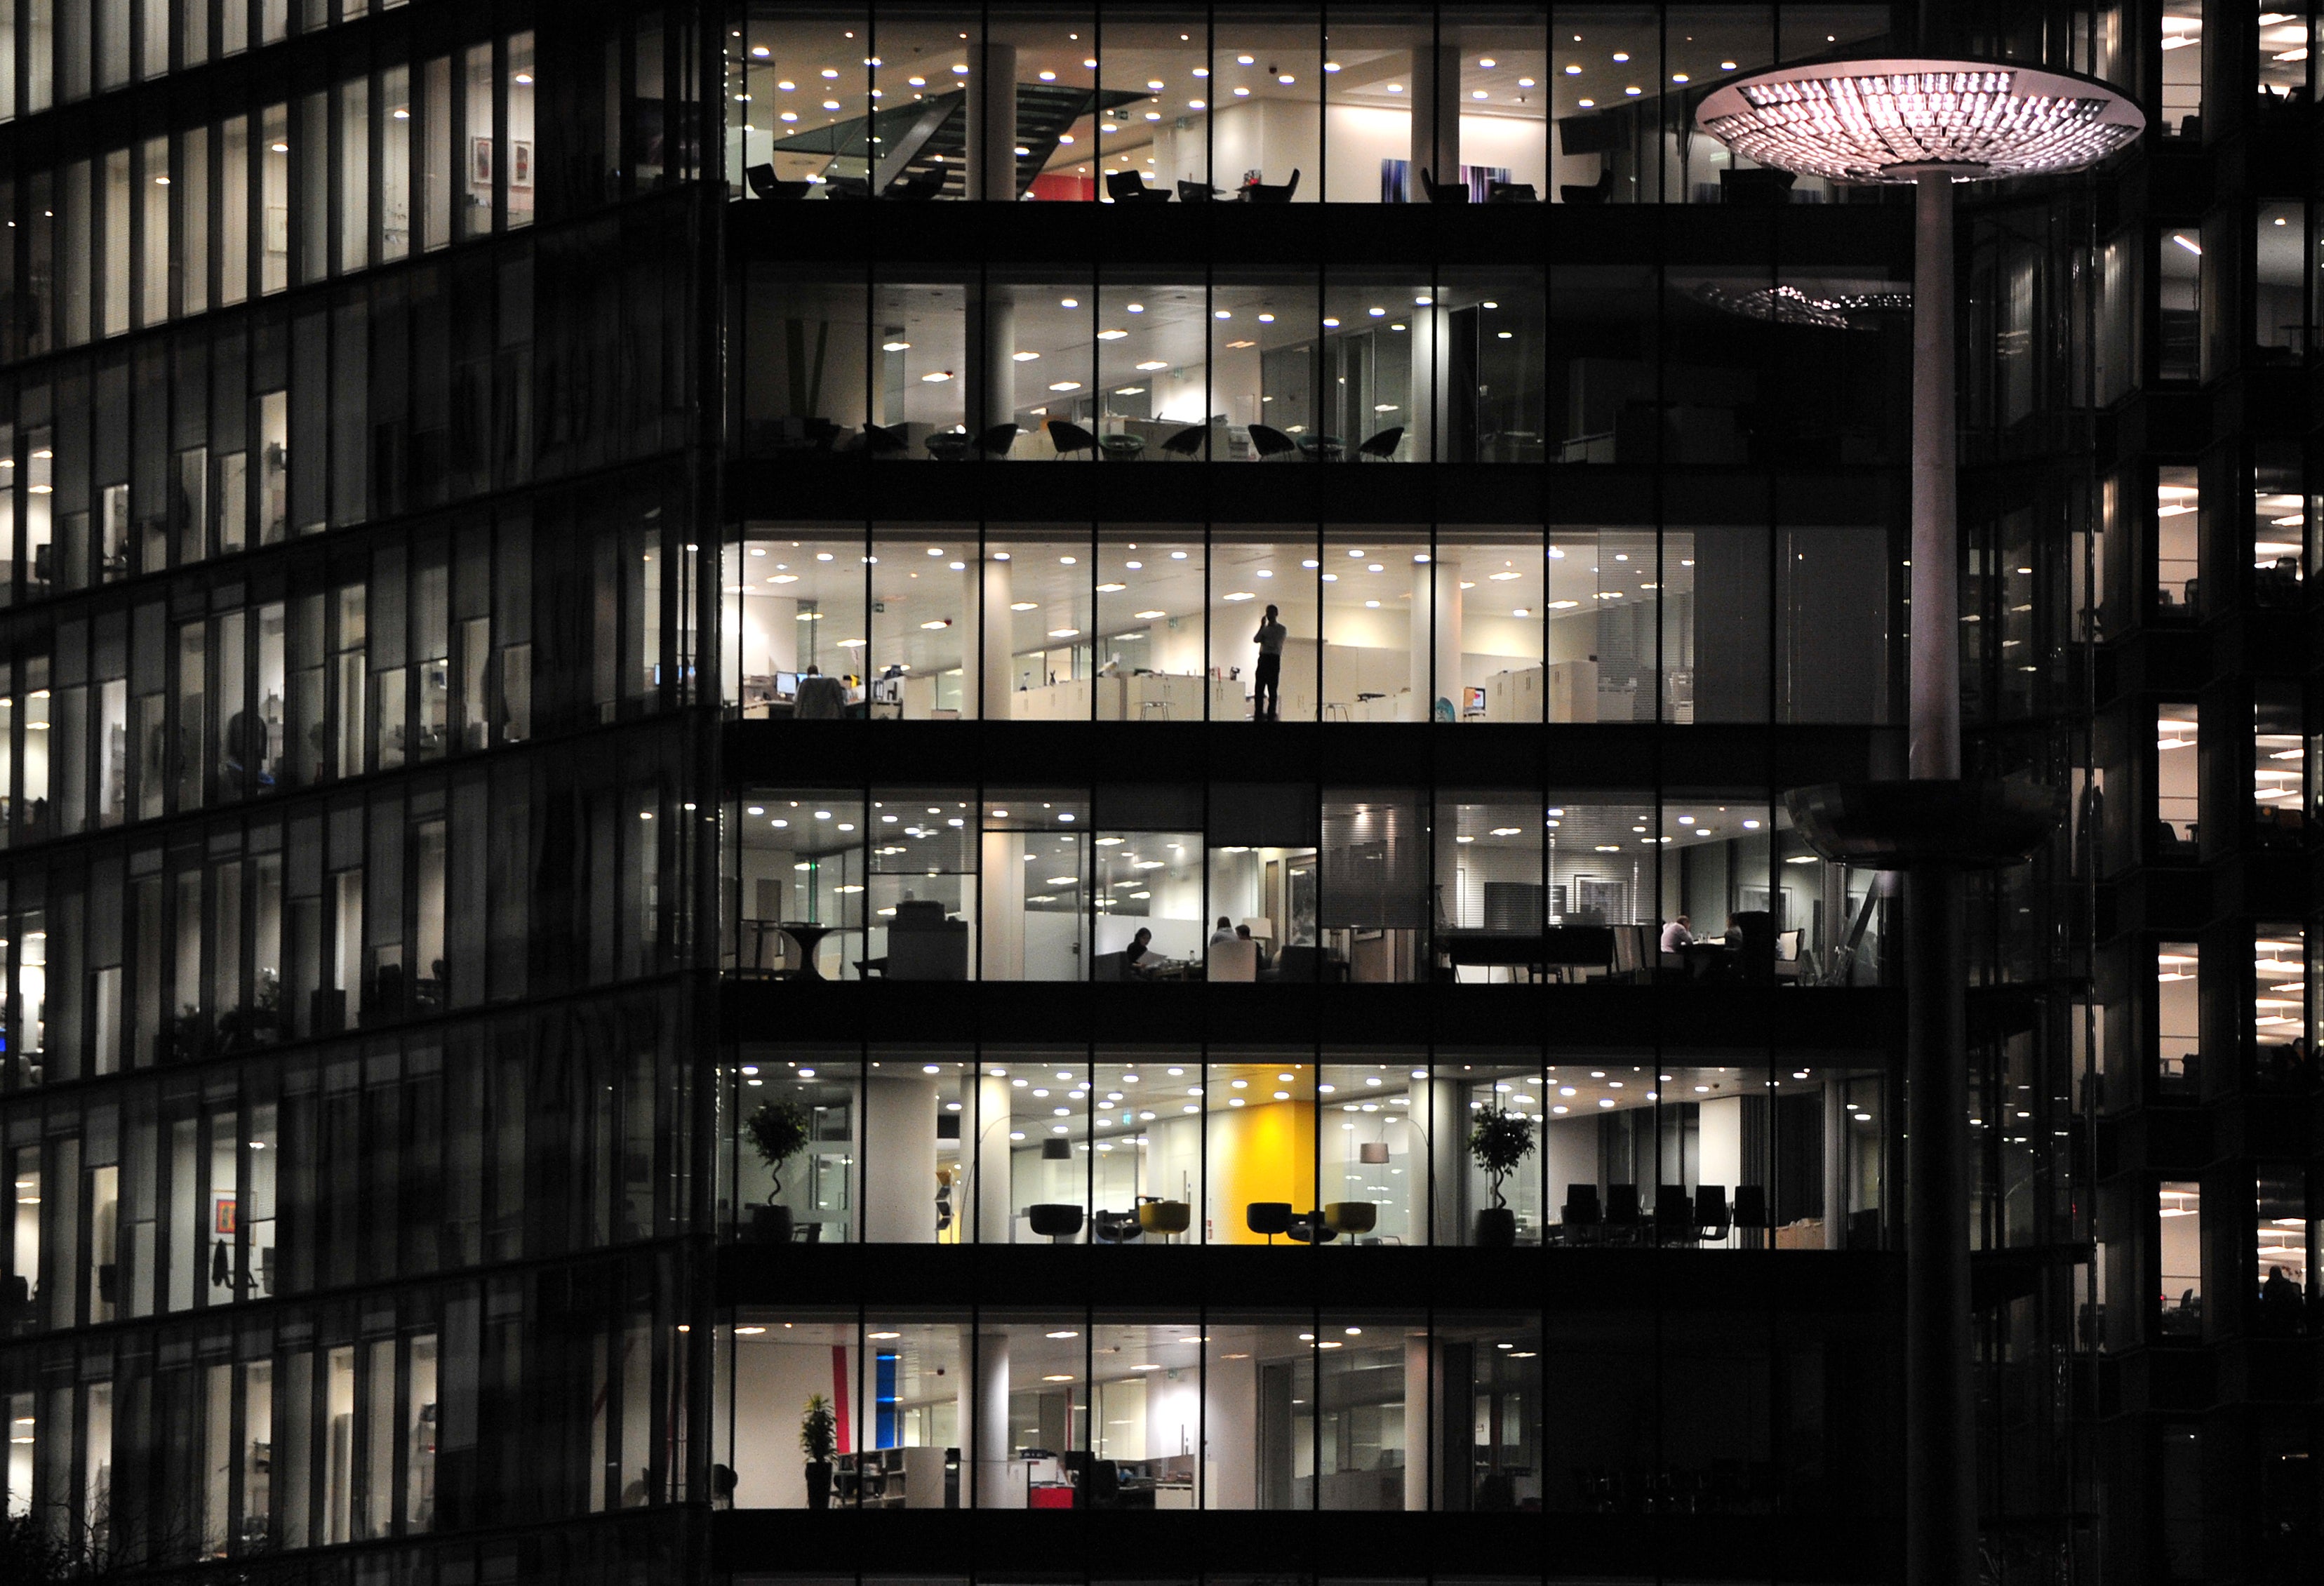 Office workers in a building along the River Thames